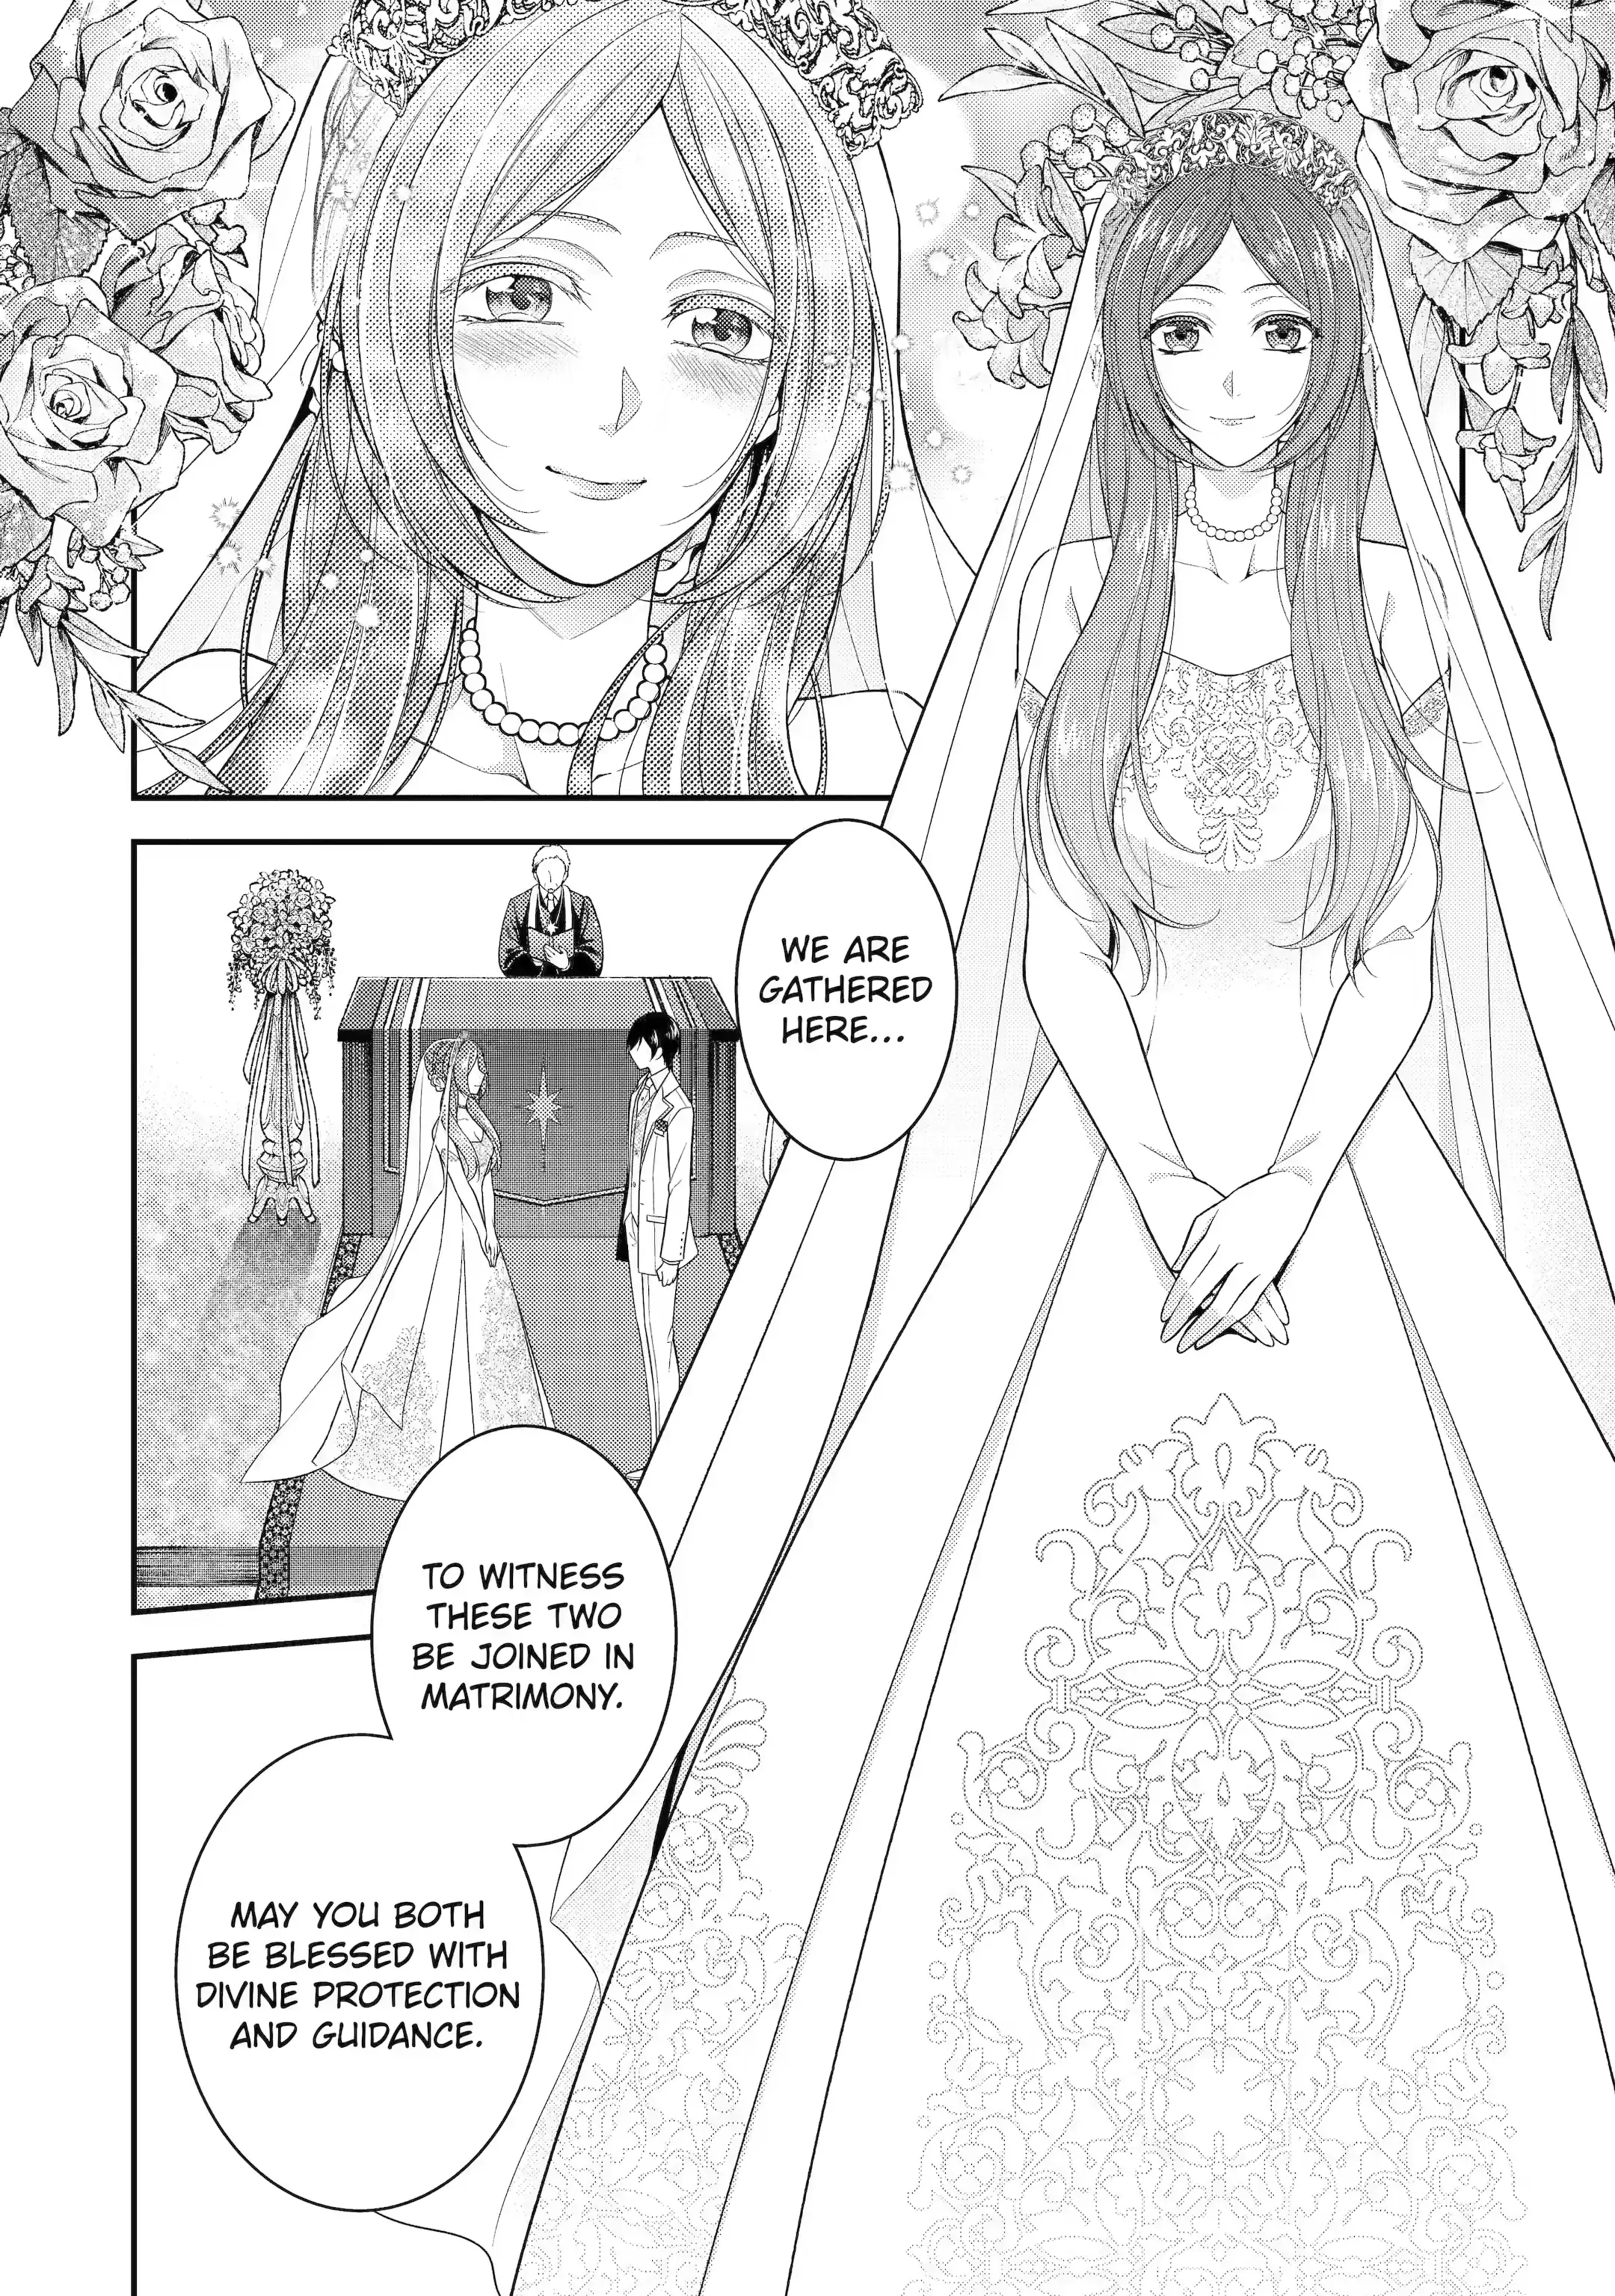 The Redemption of the Blue Rose Princess Chapter 34.4